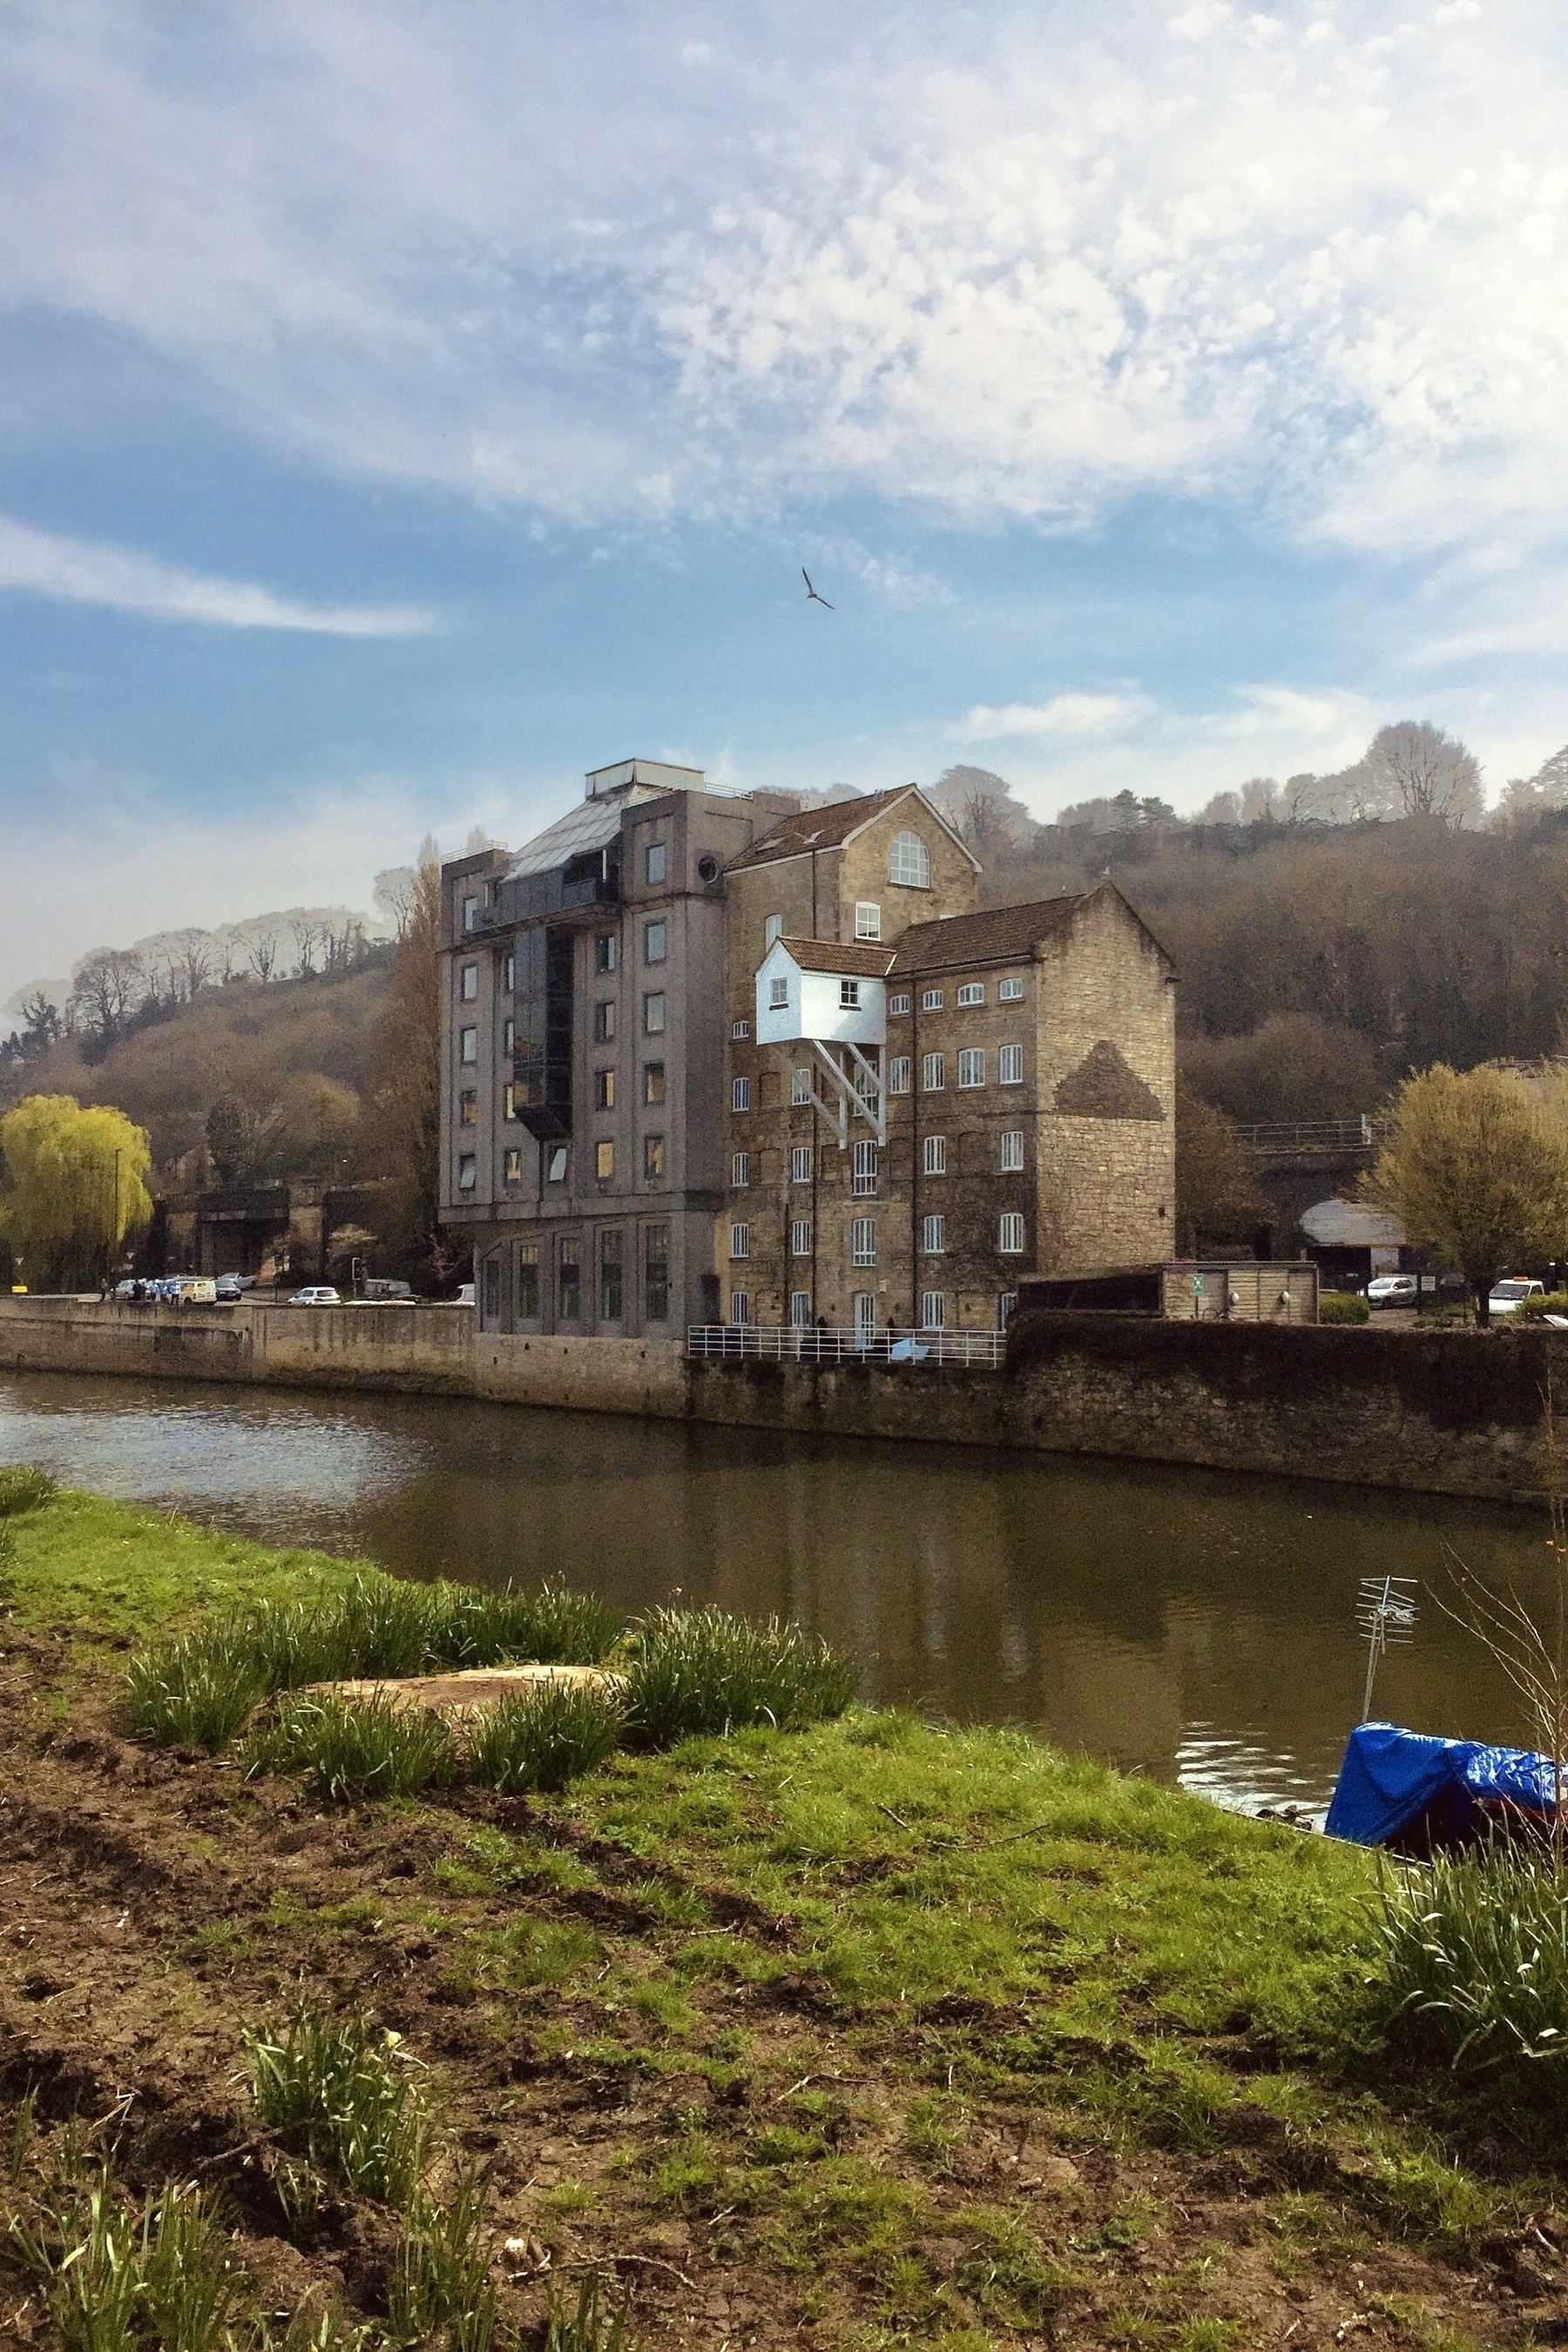 Another photo from the riverside in Bath. This time colour. An old building juts out from the banks of the river in a weird way.